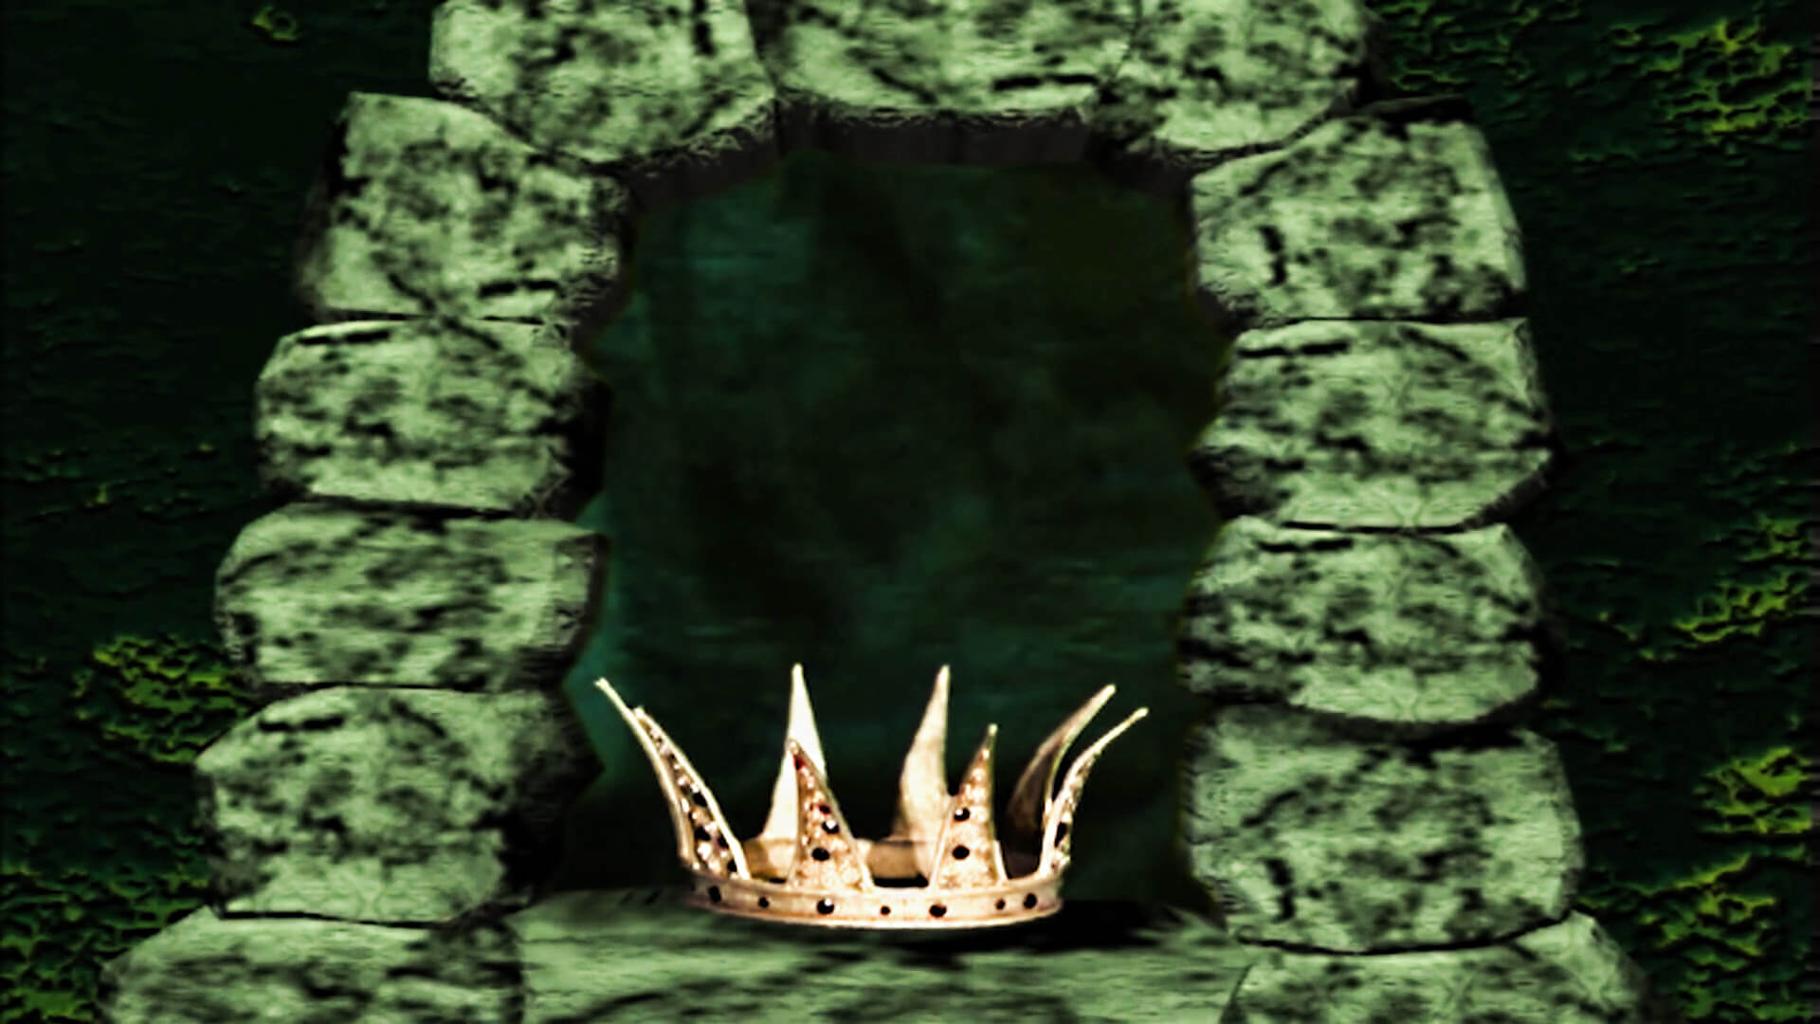 The Crown in the quest chamber in Marblehead during Knightmare Series 8 (1994).